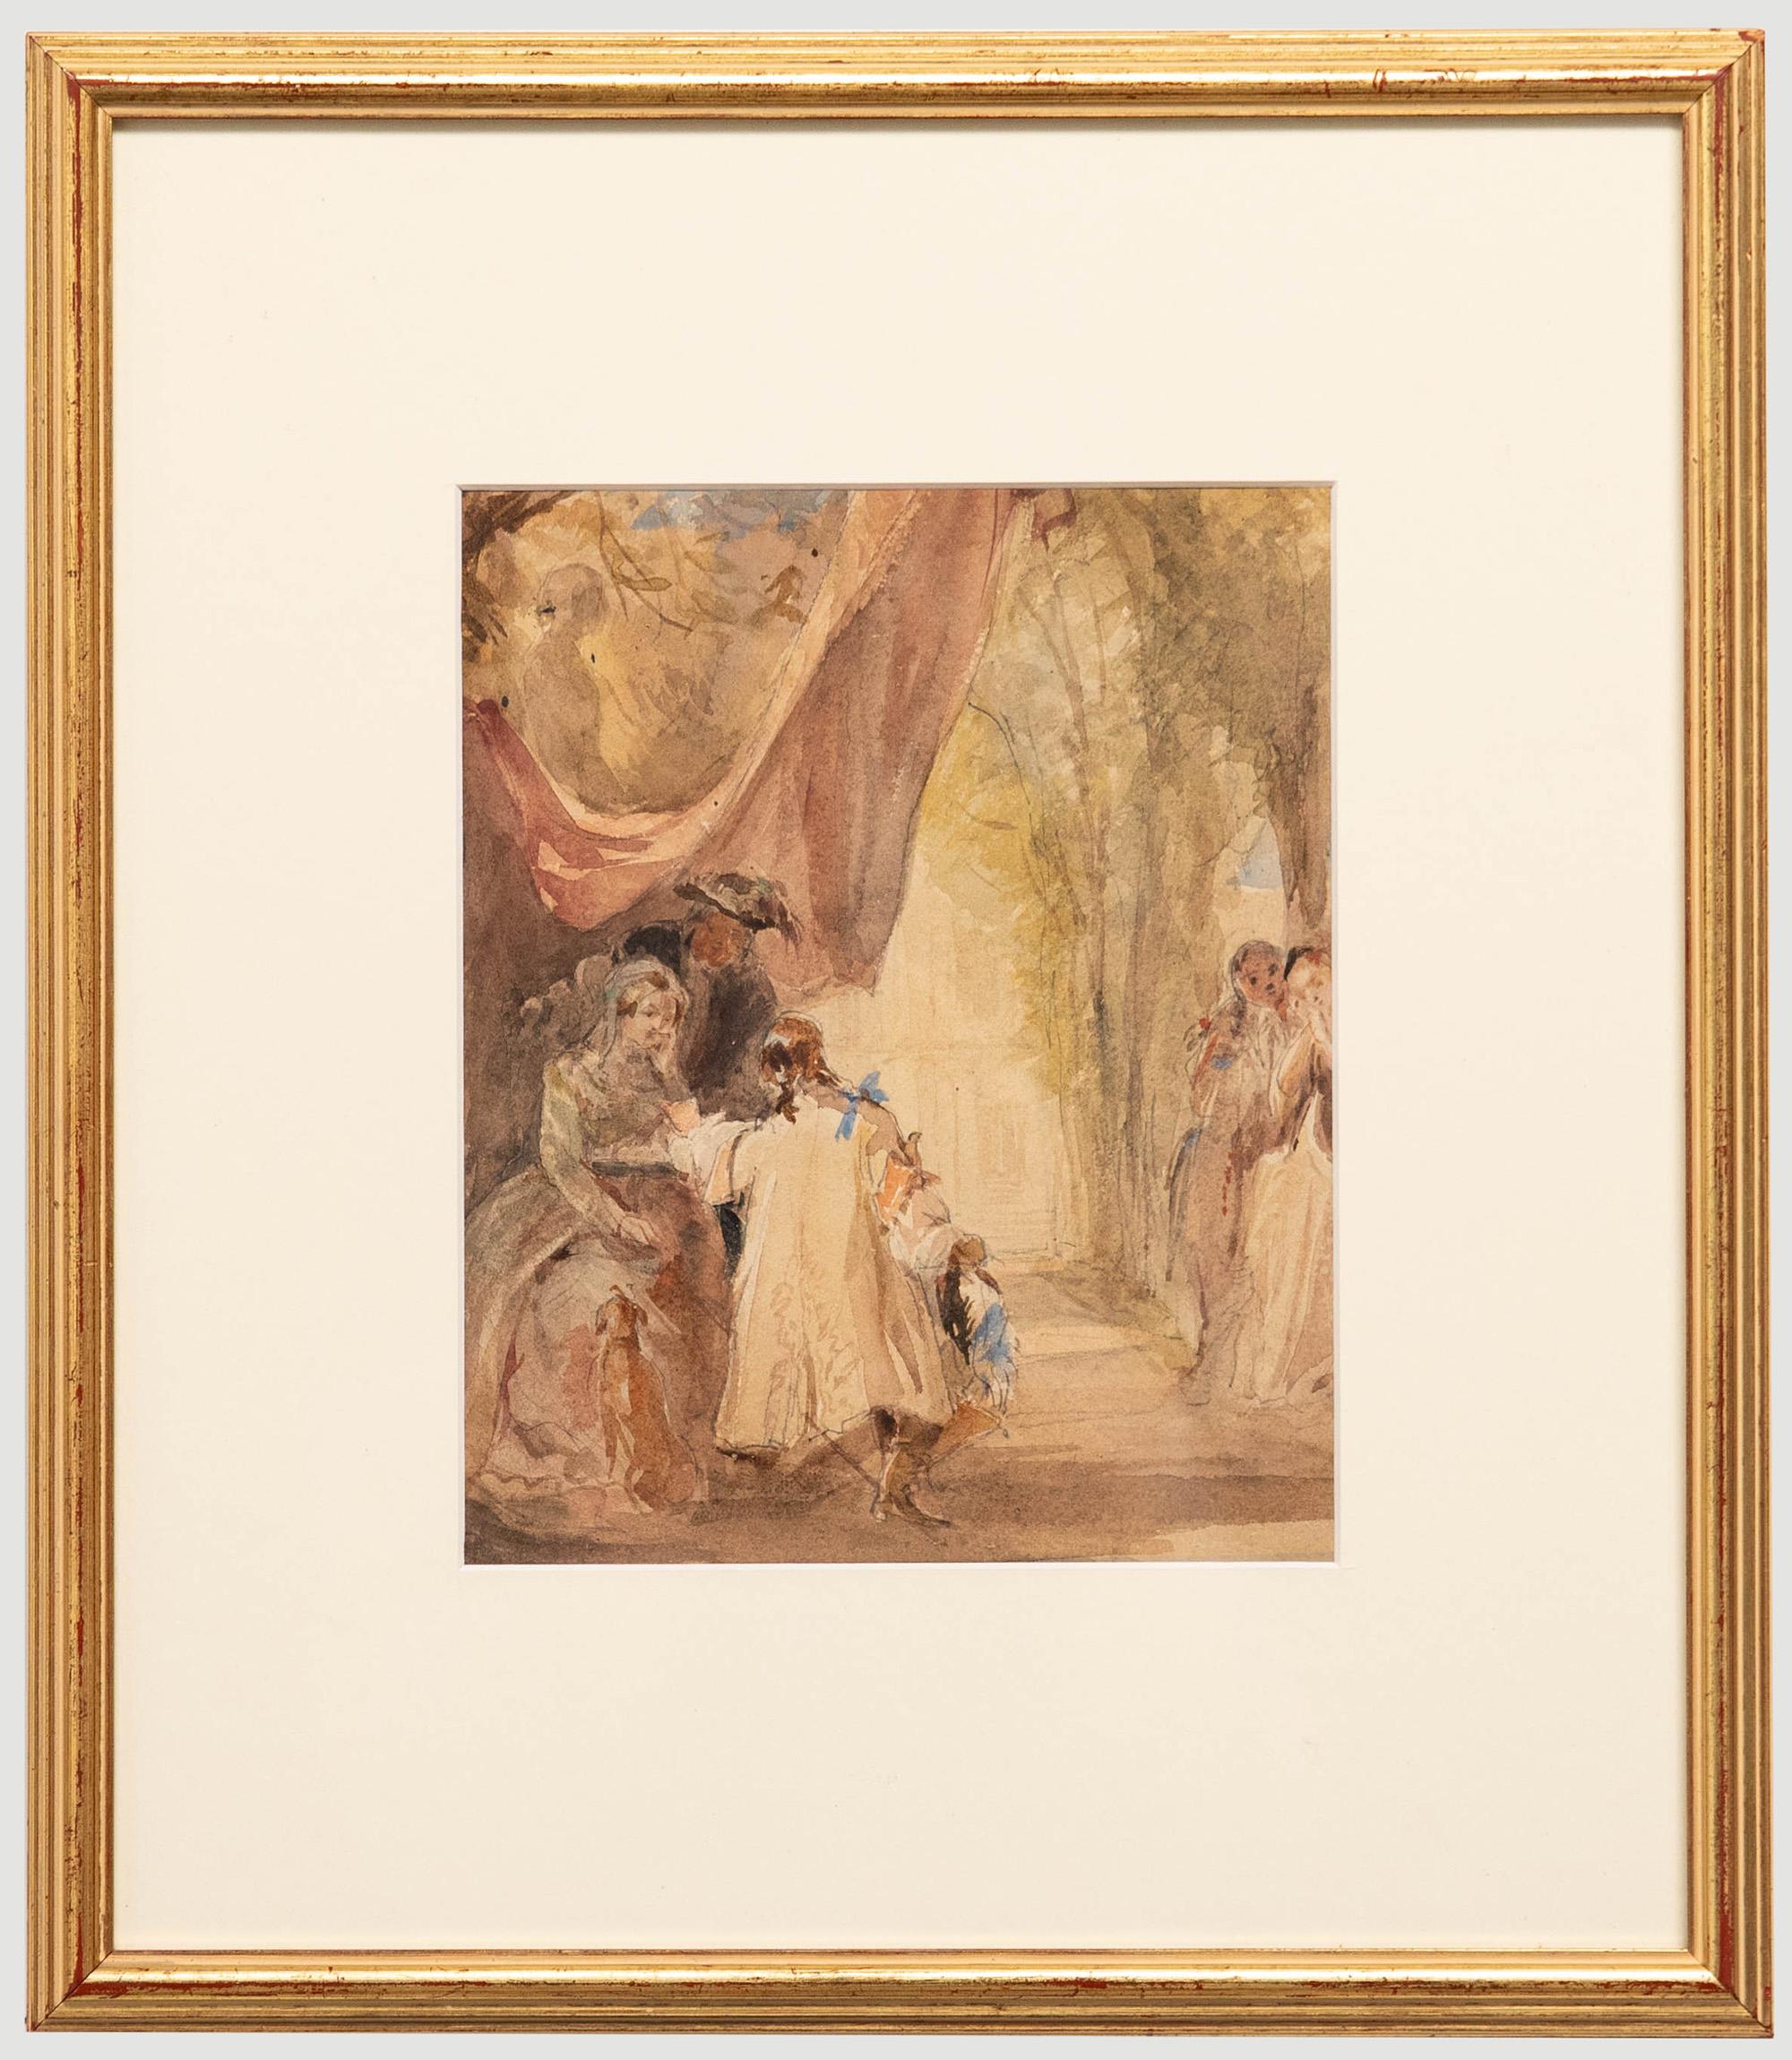 This charming genre scene depicts the arrival of an eagerly anticipated guest to the royal gardens. The owners of this grand residence can be seen greeting the flamboyant individual under an avenue of trees. Unsigned. Beautifully presented in a